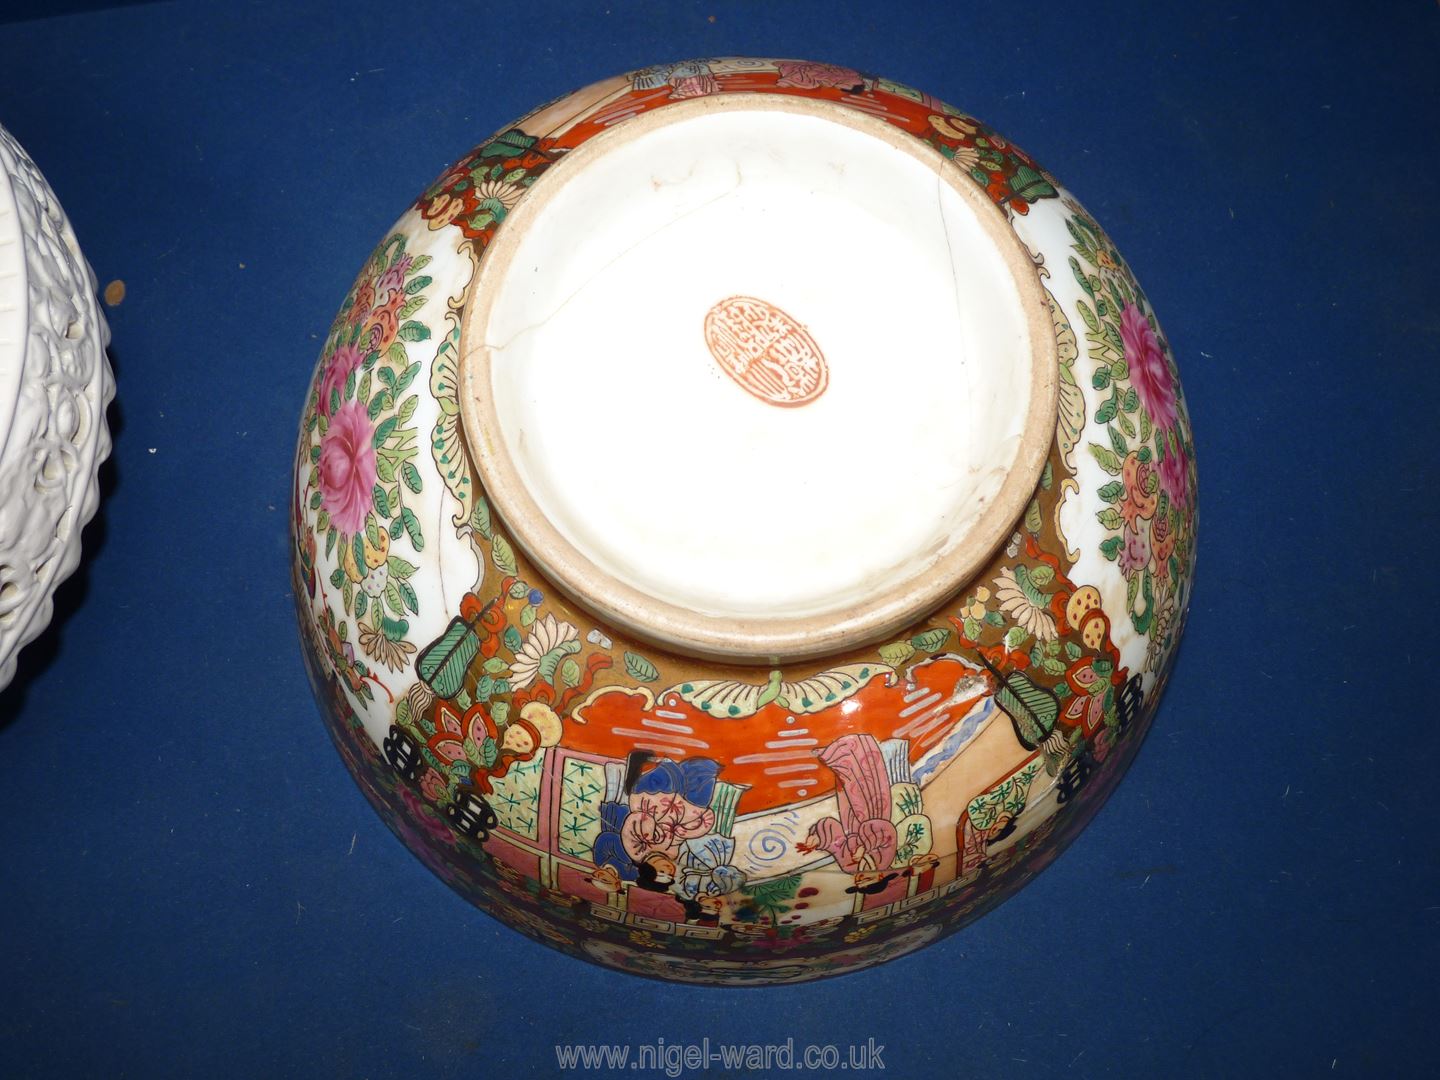 A hand-painted Chinese bowl with old repairs, together with a heavy cream coloured cake stand. - Image 5 of 5